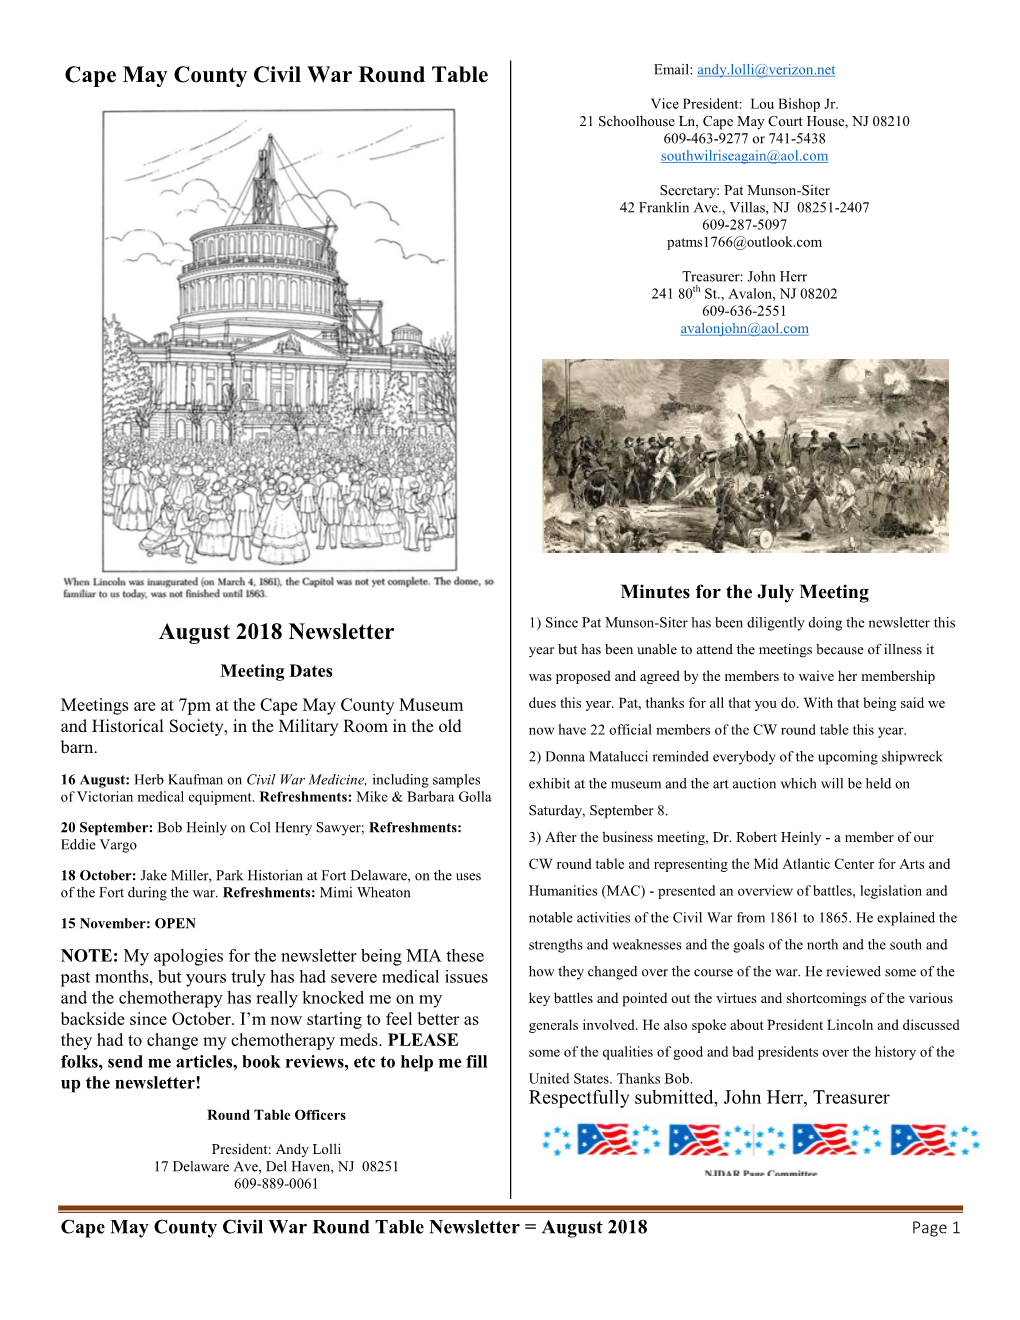 Cape May County Civil War Round Table August 2018 Newsletter